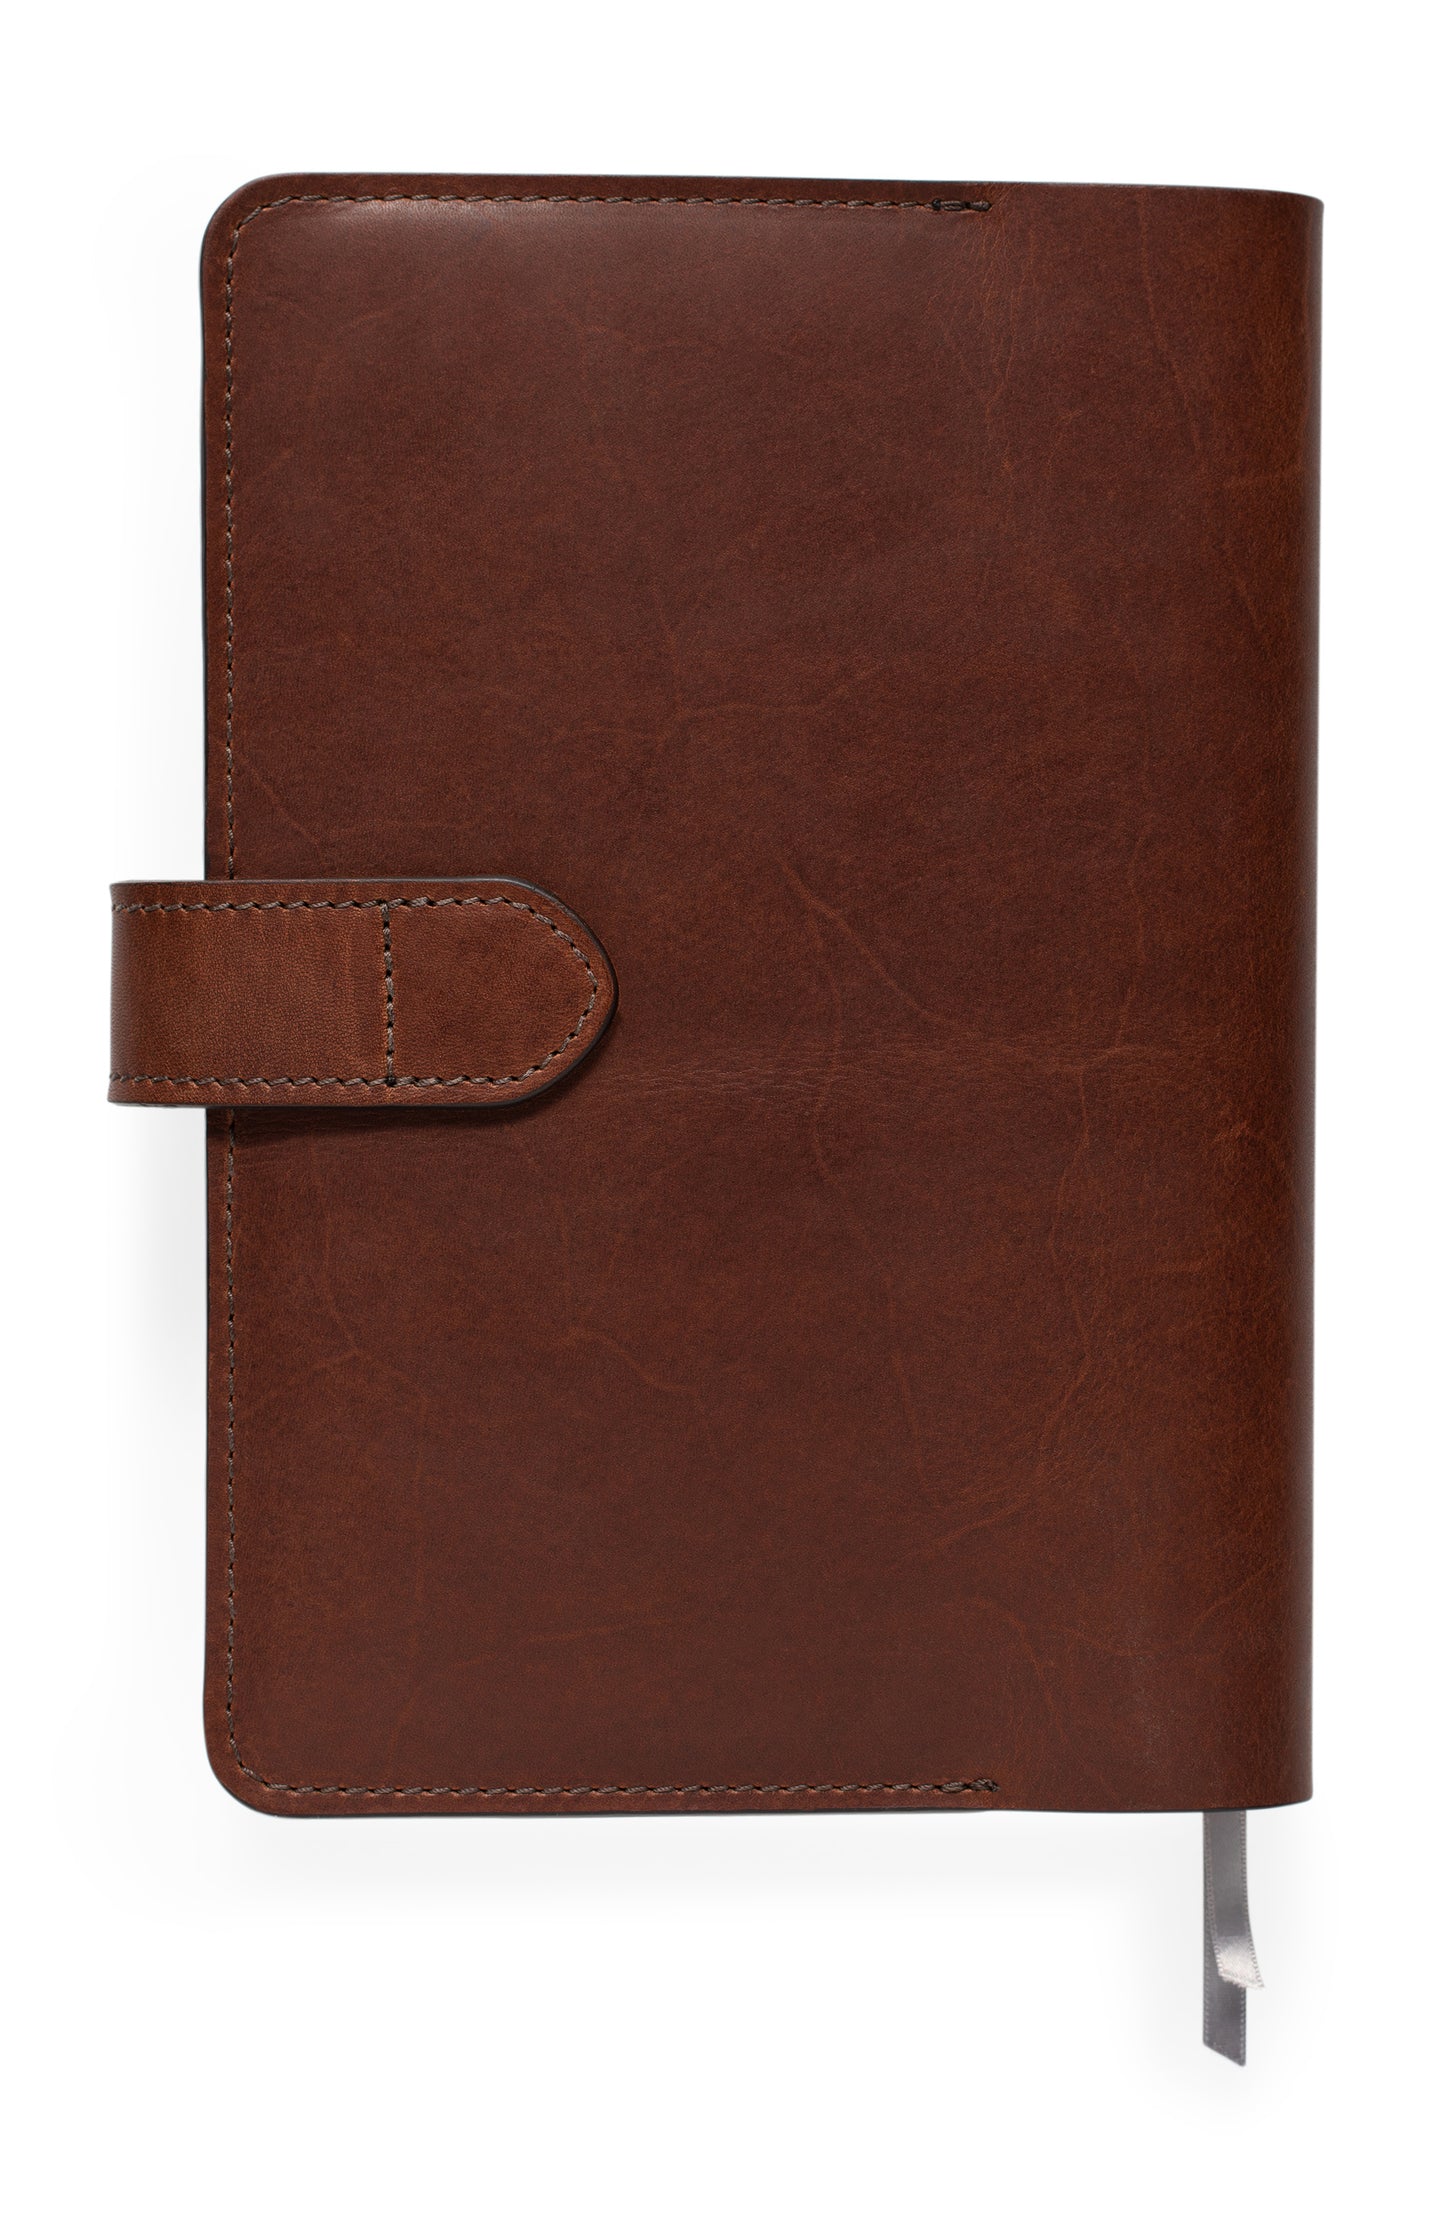 back of focus planner cover designed to fit full focus planner by Michael Hyatt, pictured in vintage brown full grain leather